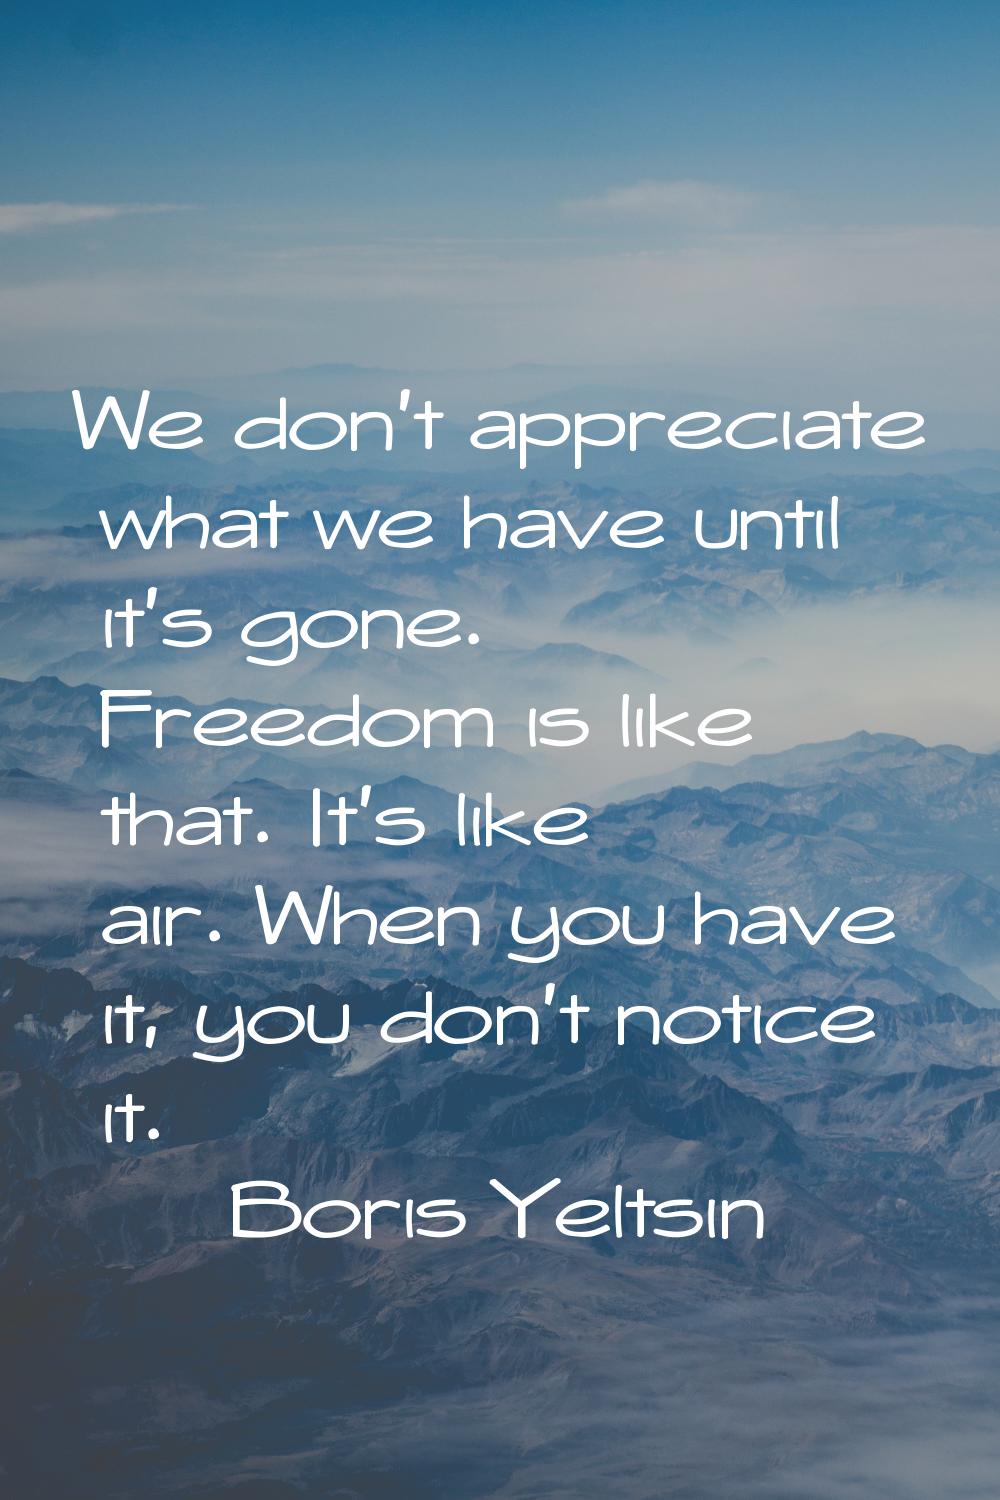 We don't appreciate what we have until it's gone. Freedom is like that. It's like air. When you hav